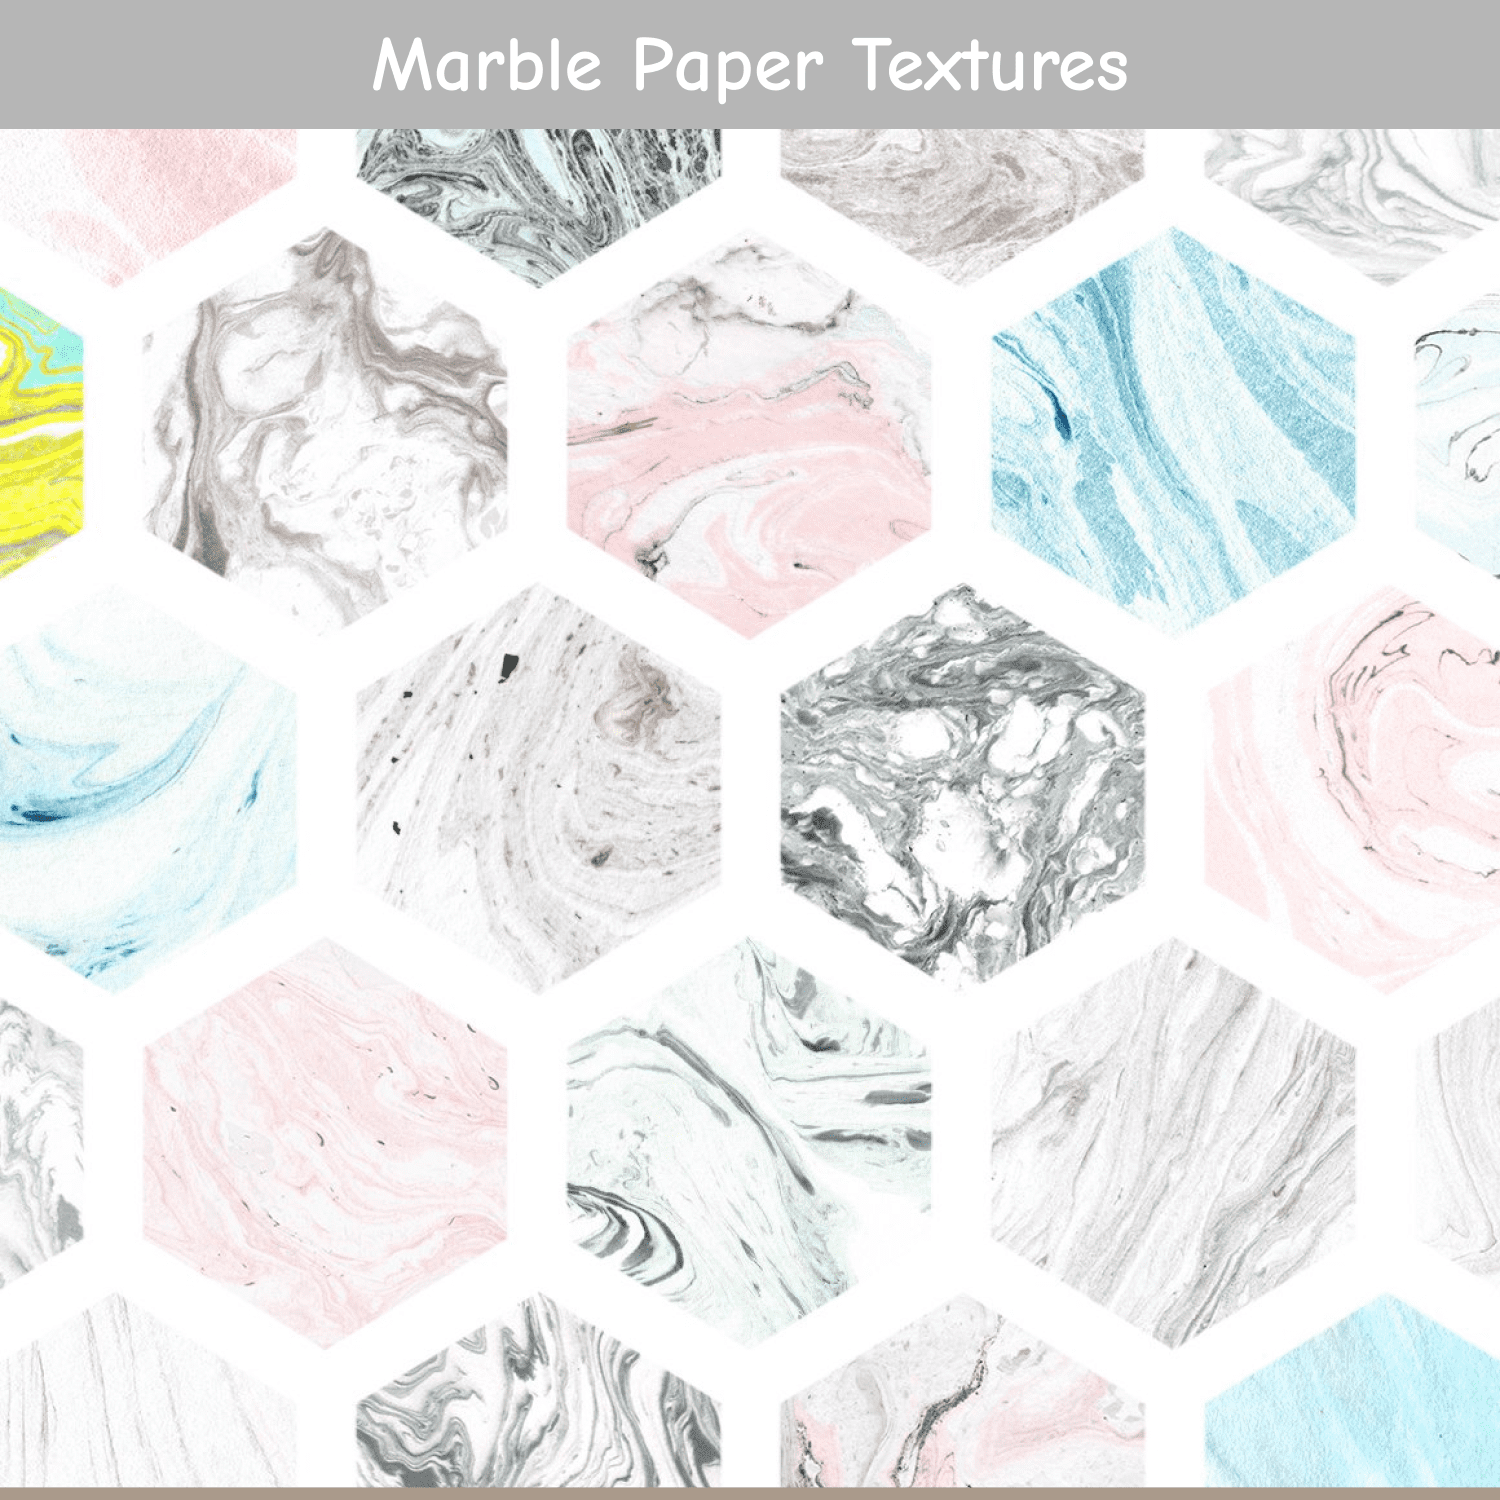 Marble Paper Textures cover.